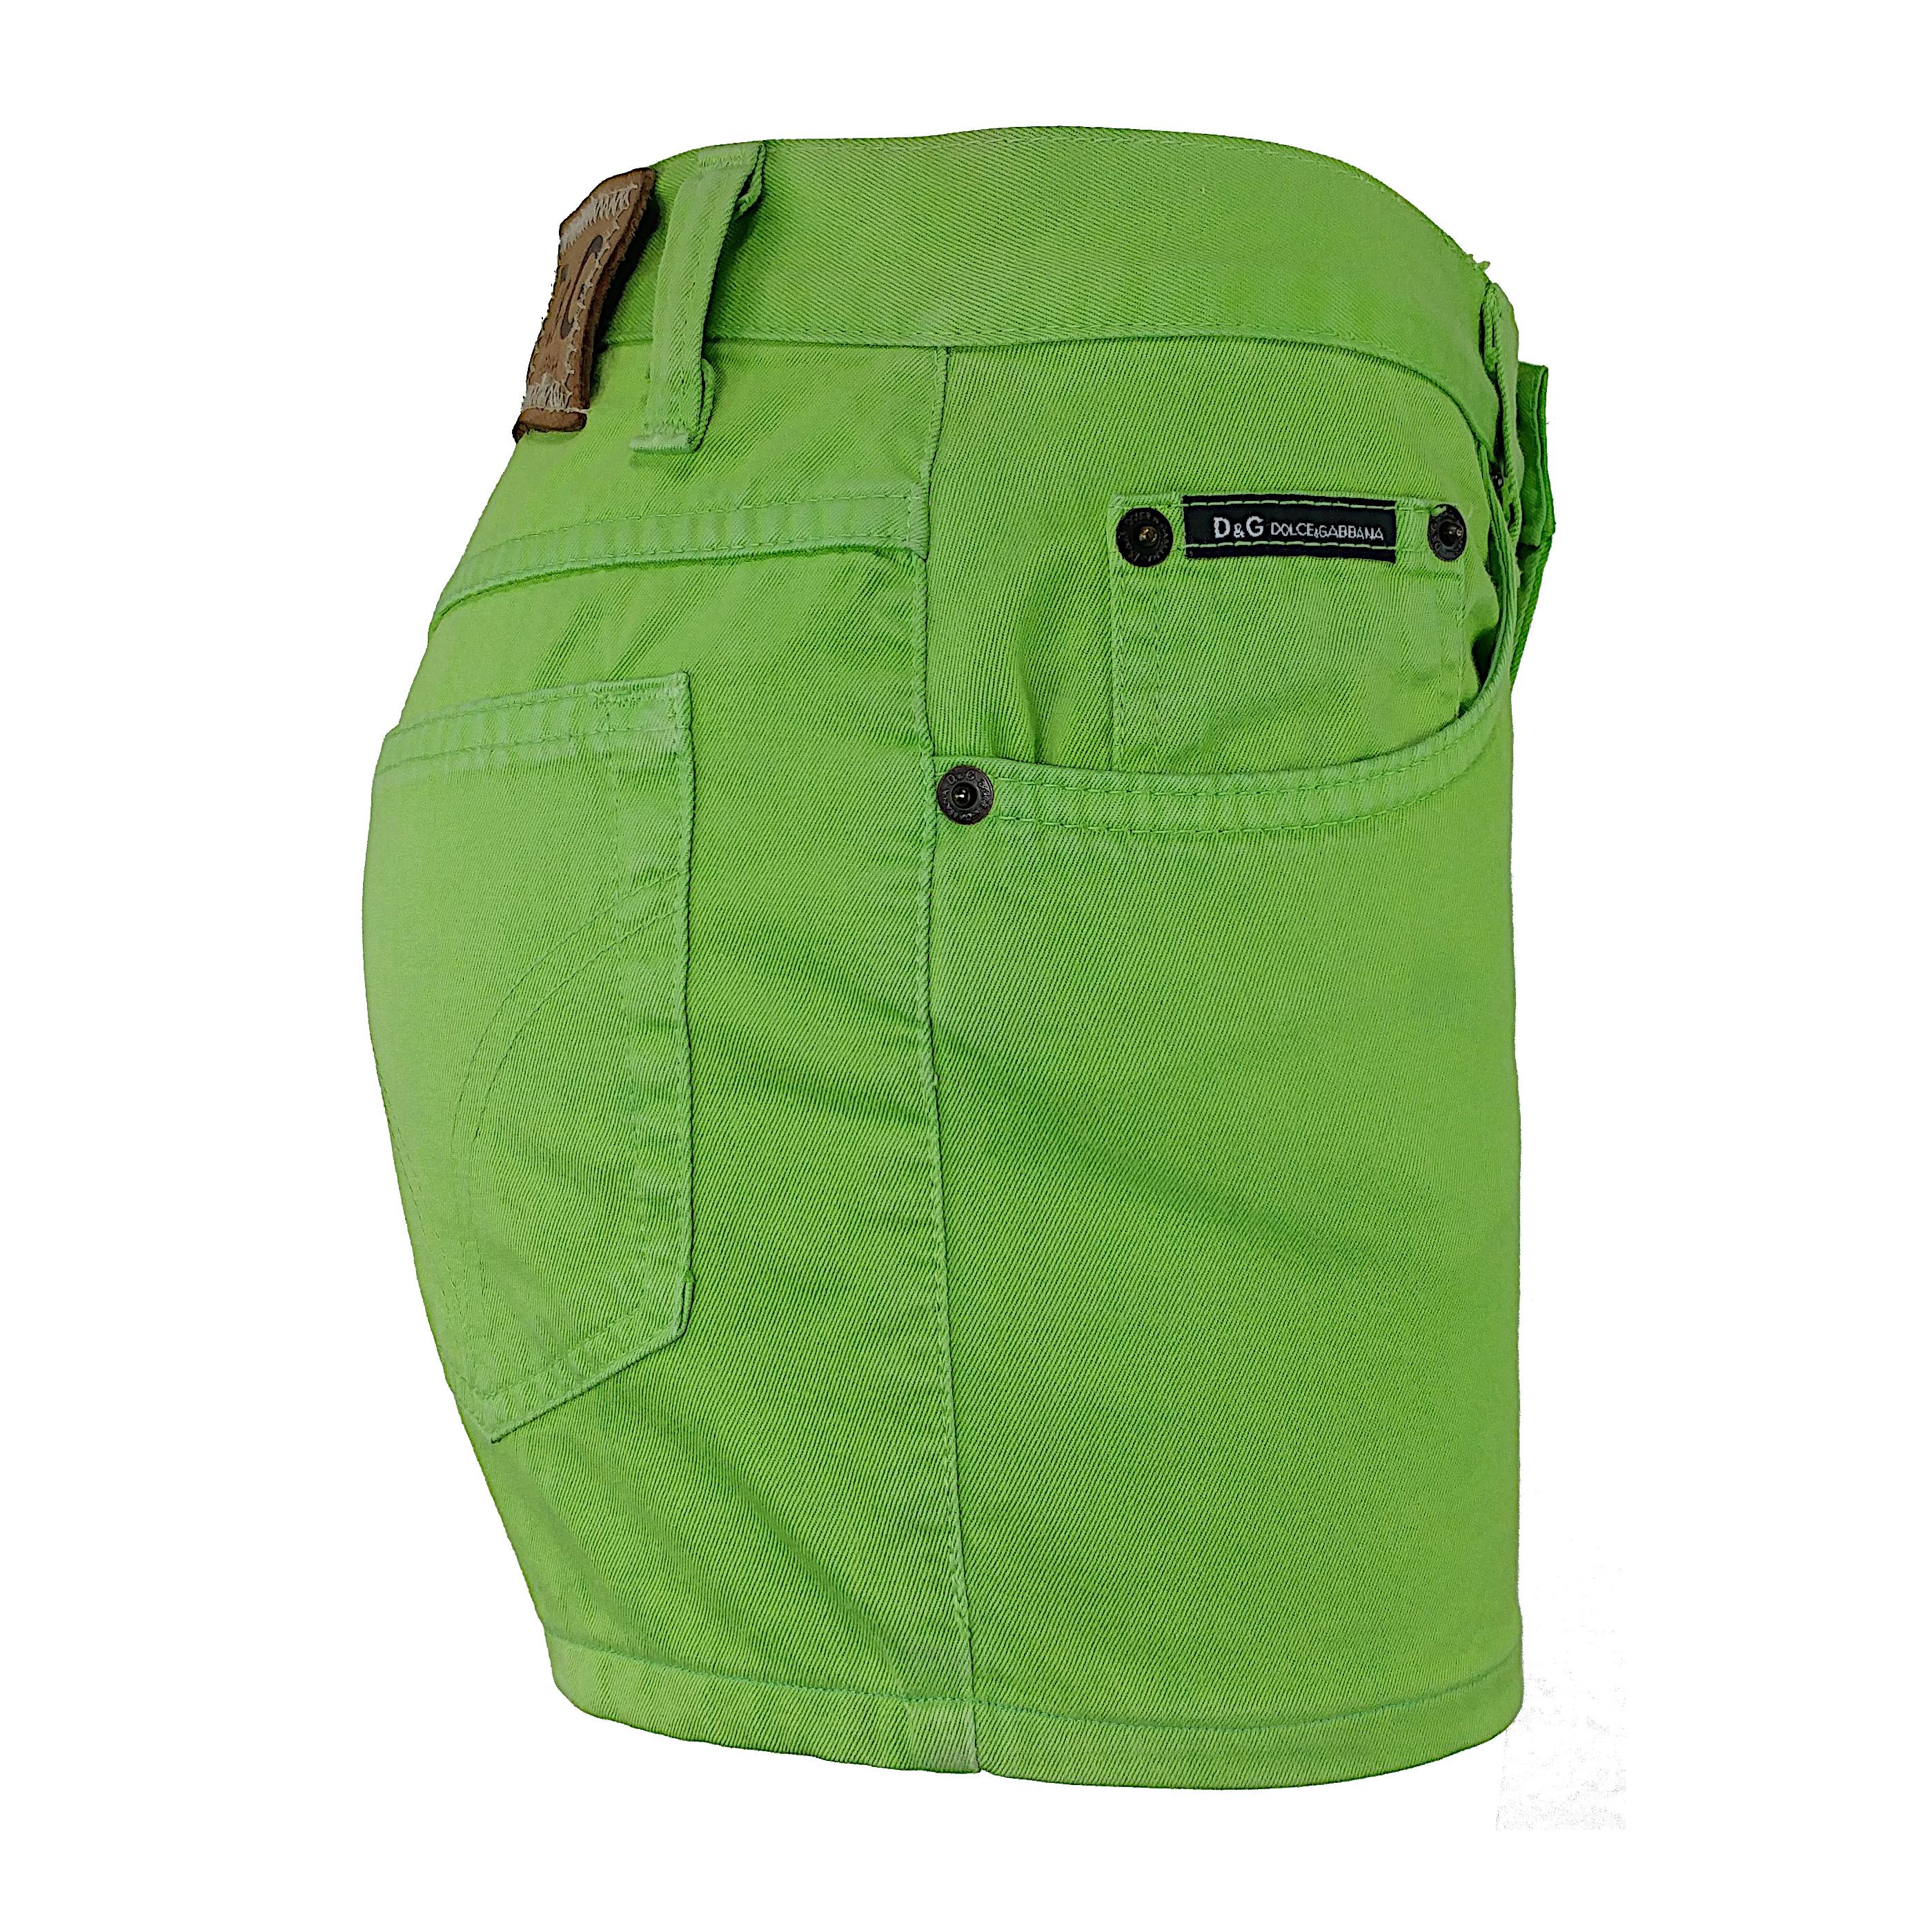 Green will be very trendy in the next seasons! Here is a pair of hot pants by Dolce&Gabbana, with a classic 5 pockets design and a mid rise, very comfortable. The pants have been washed several times but they still show a very consistent